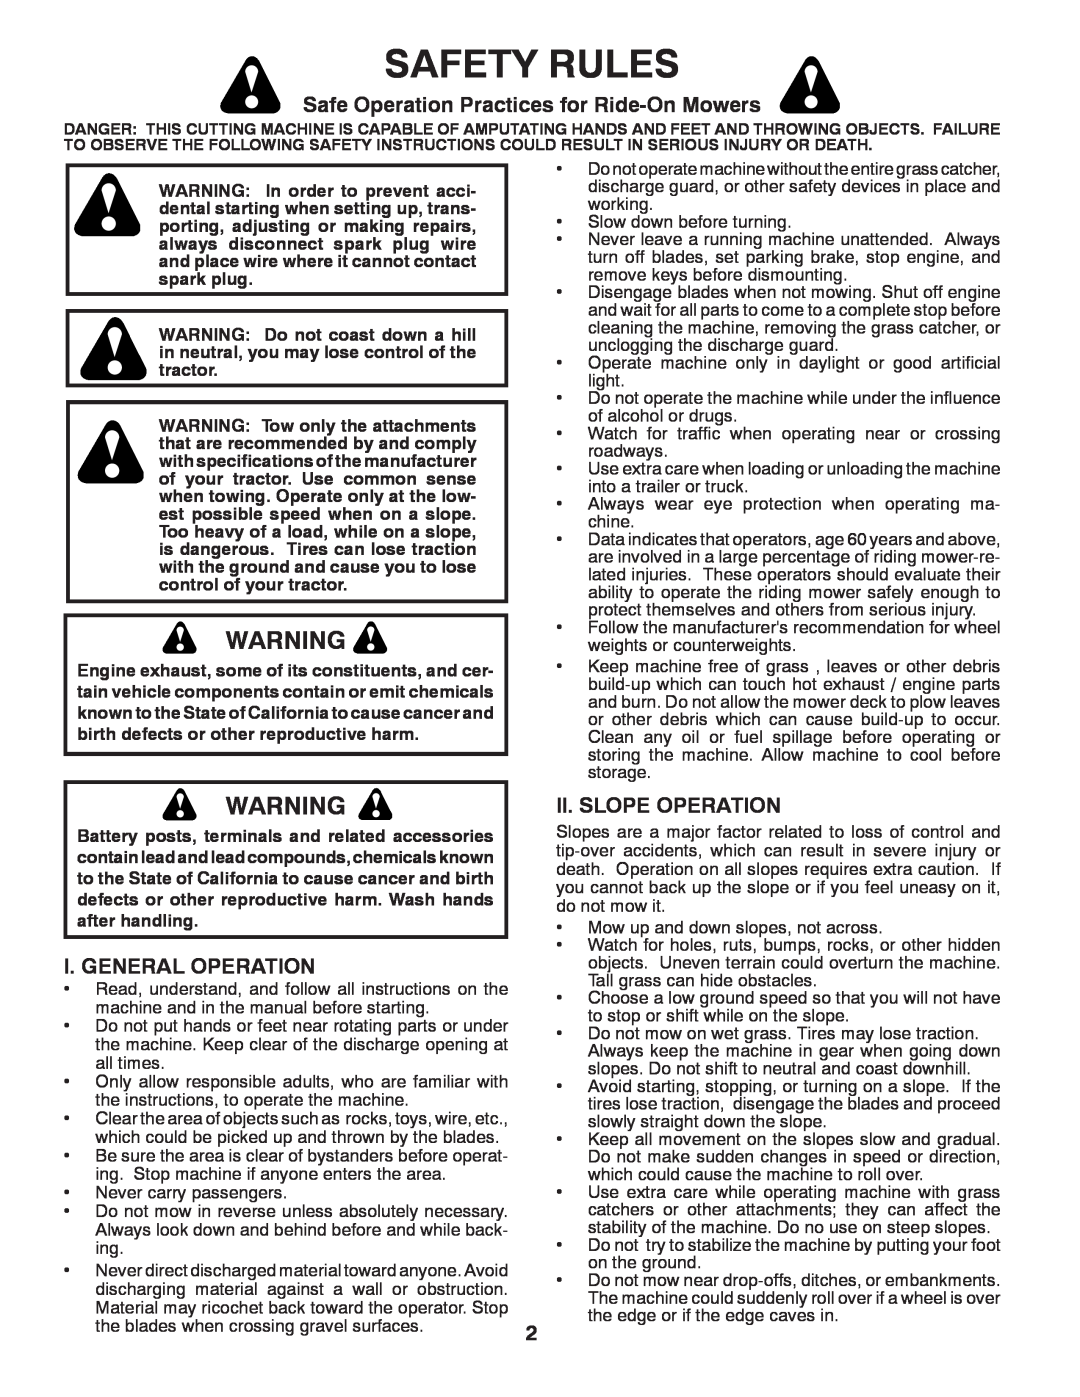 Poulan 96012008400 Safety Rules, Safe Operation Practices for Ride-On Mowers, I. General Operation, Ii. Slope Operation 